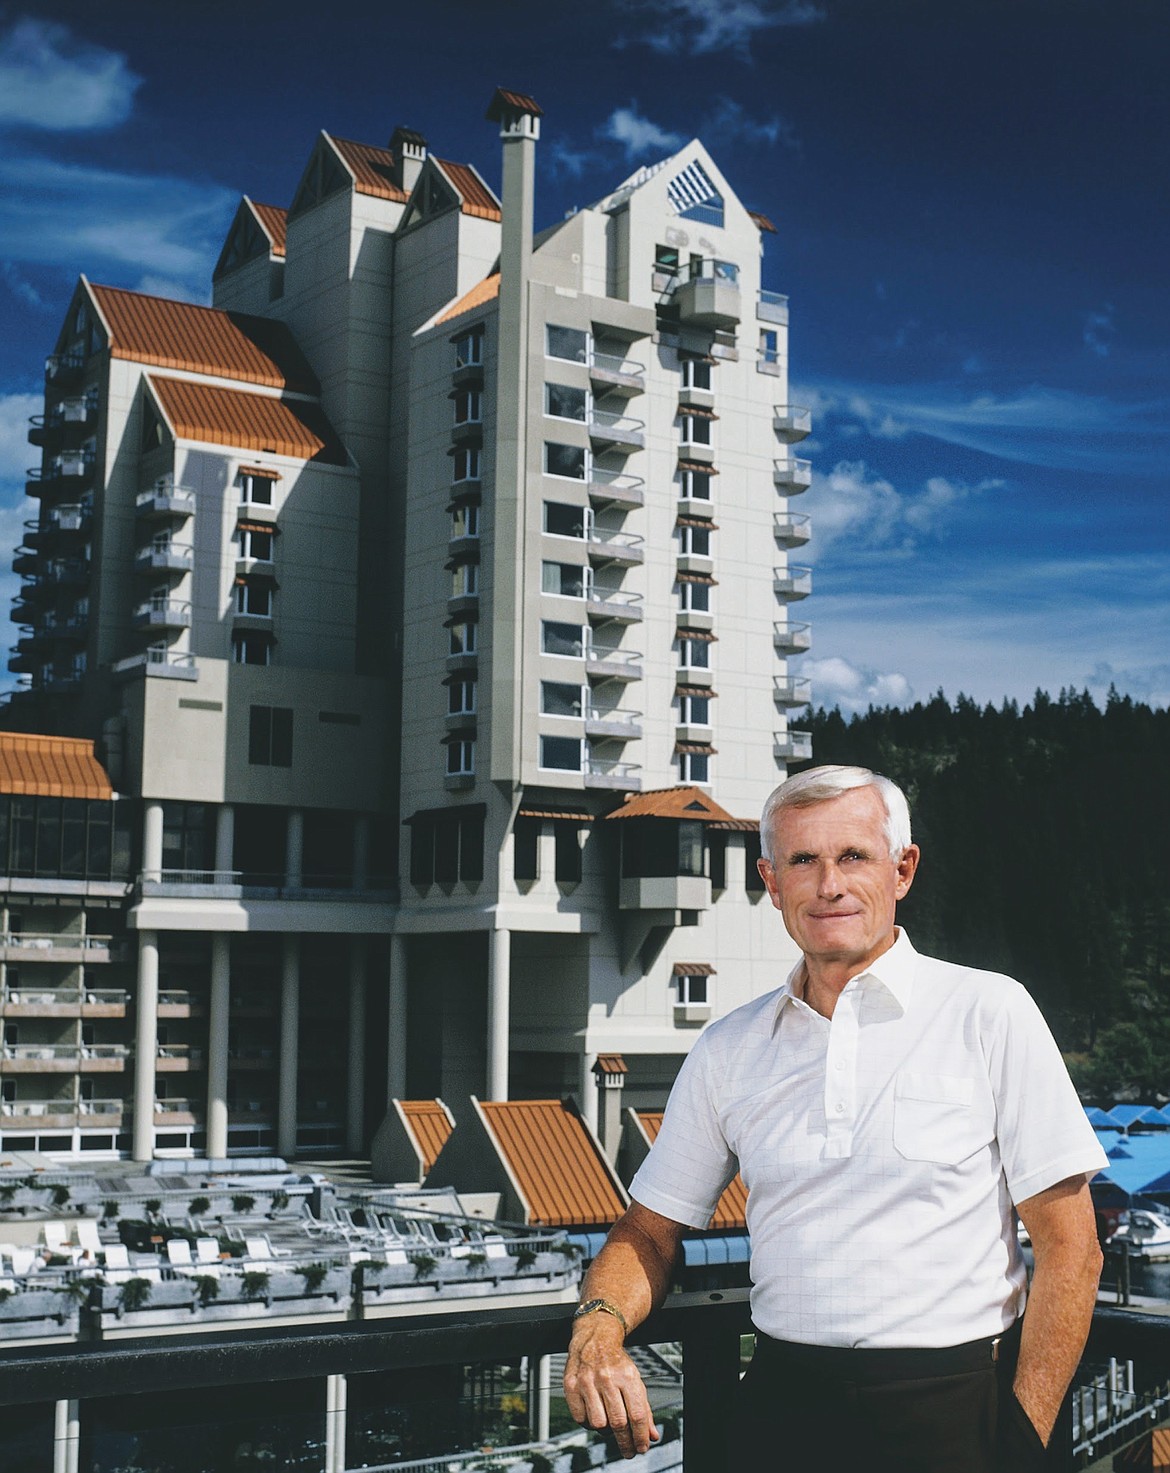 It was a bold move to open The Coeur d'Alene Resort in 1986, but Duane Hagadone had the vision that it would succeed.